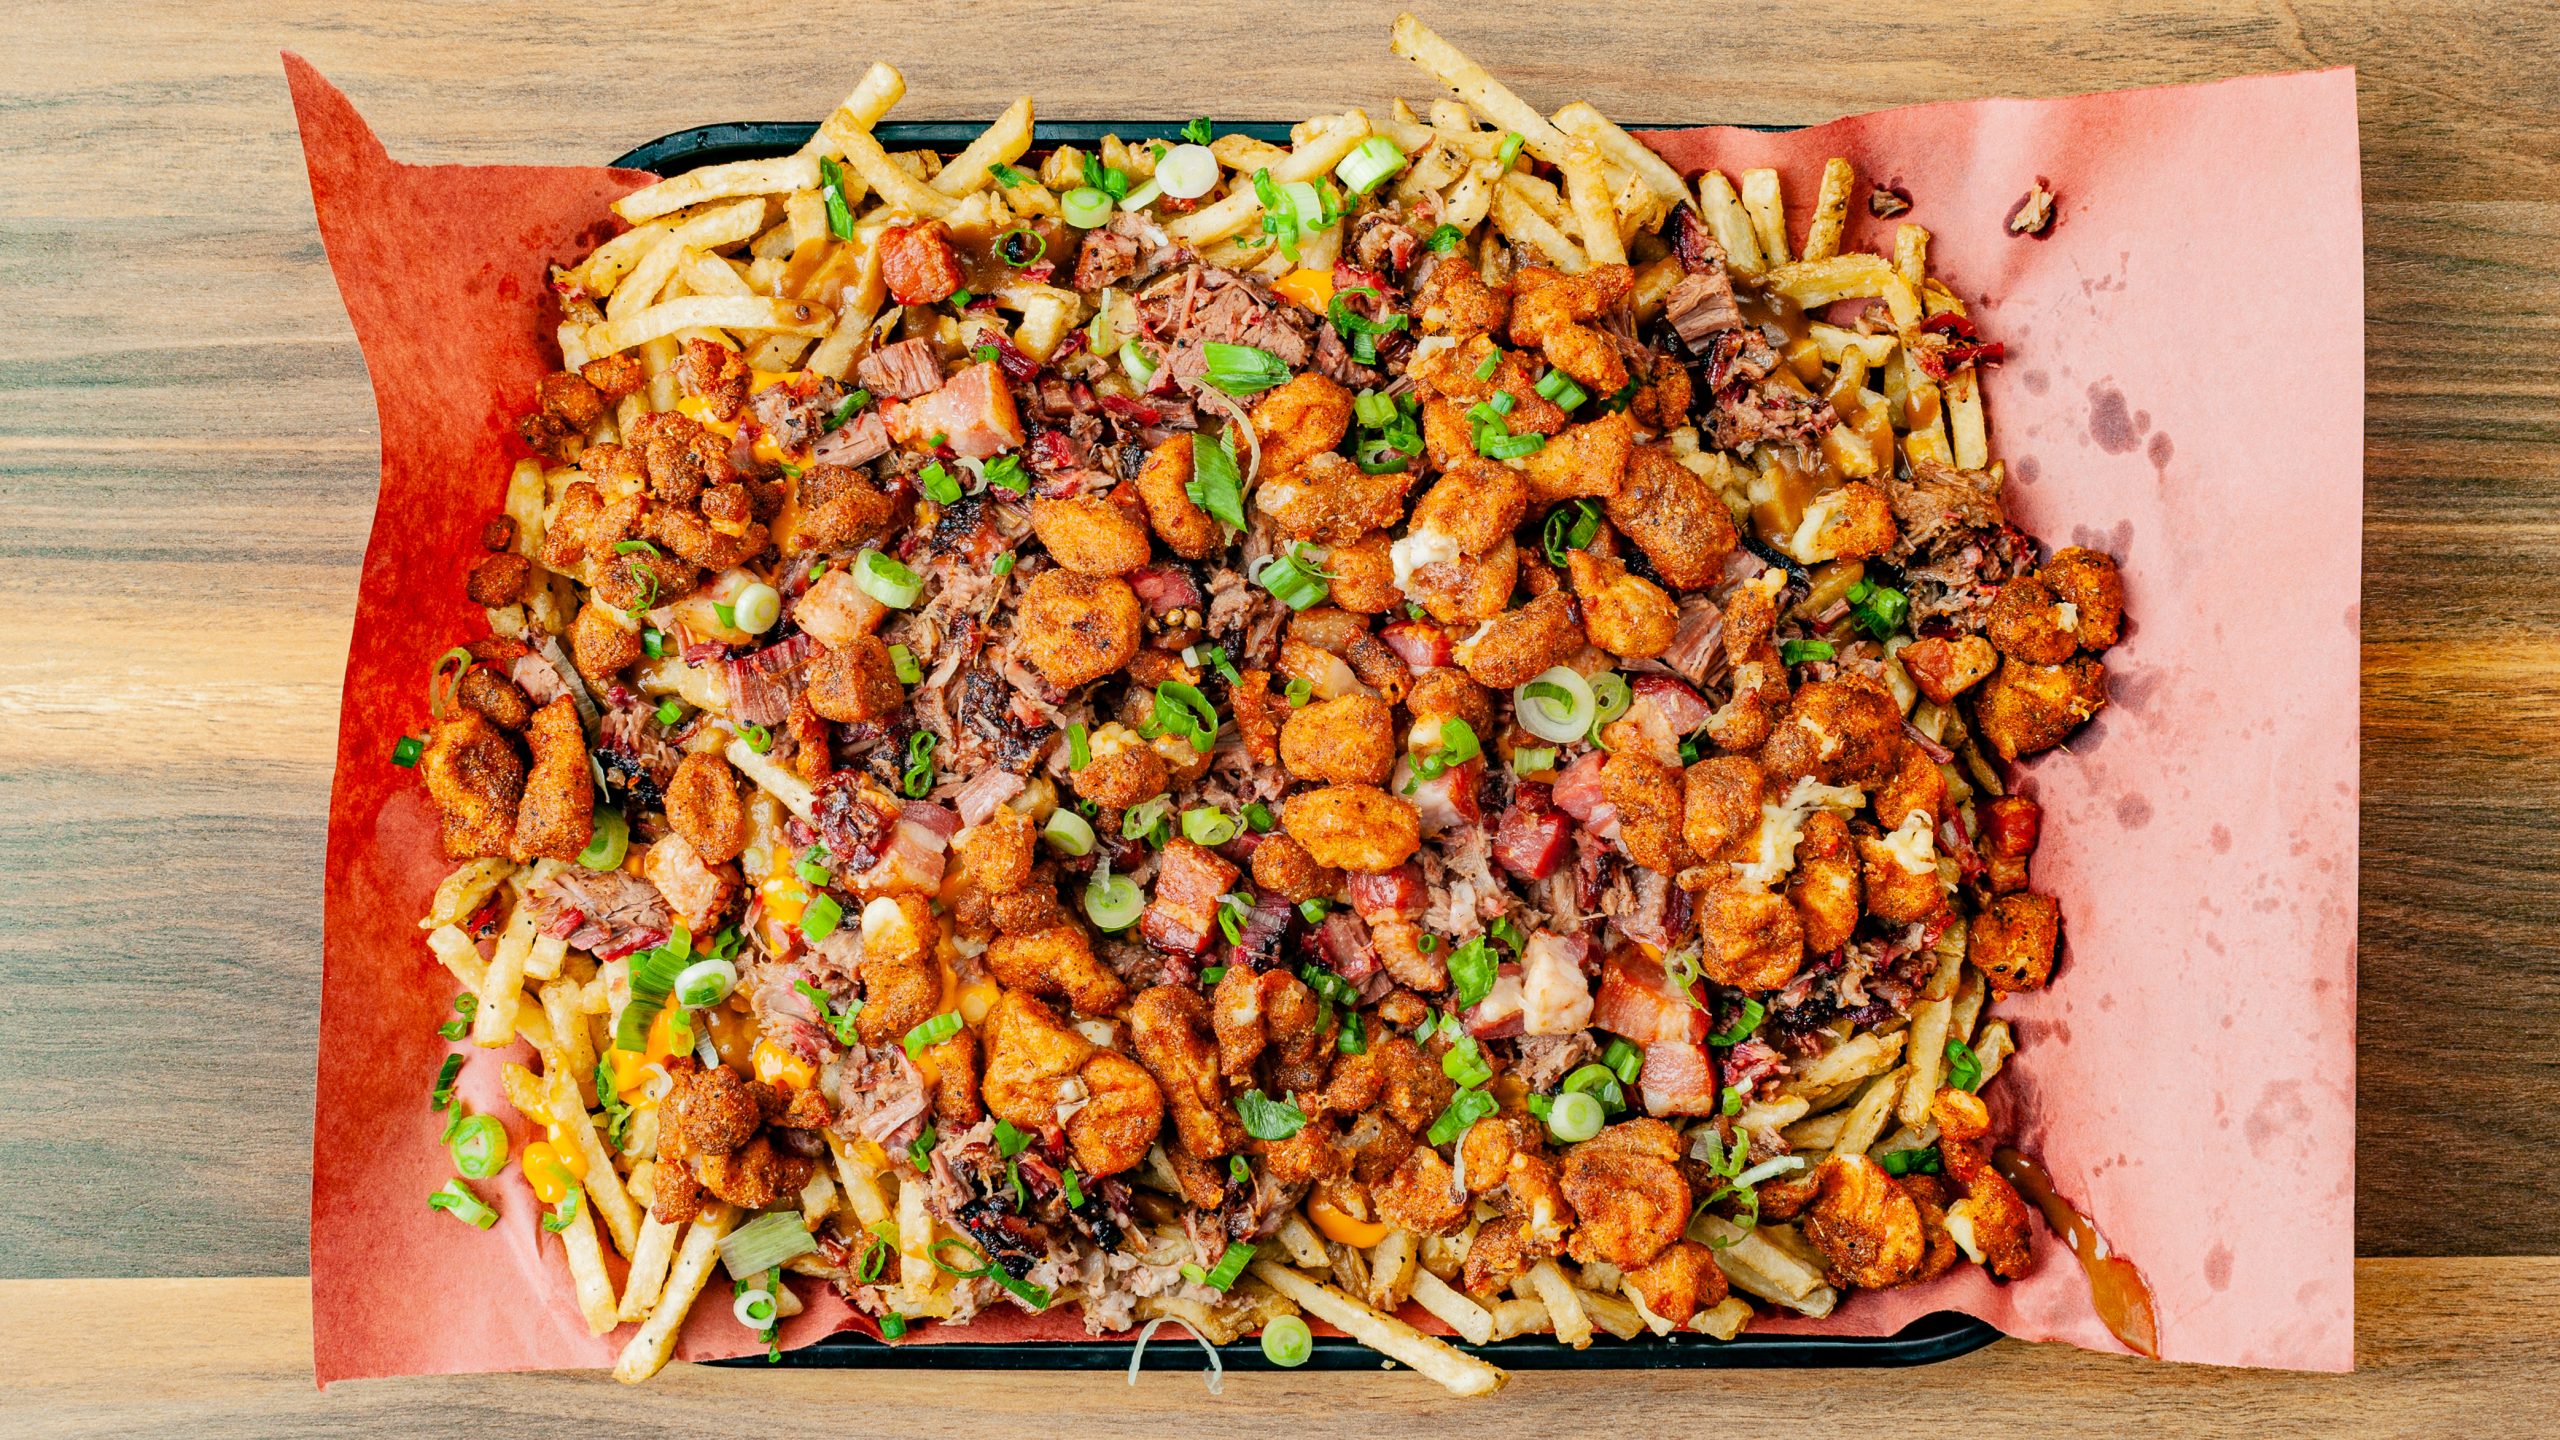 Prairie Dog Brewing's Extreme Poutine menu item, a platter with fries, gravy, nacho cheese, fried cheese curds, brisket, pulled pork, bacon lardons, and green onions.